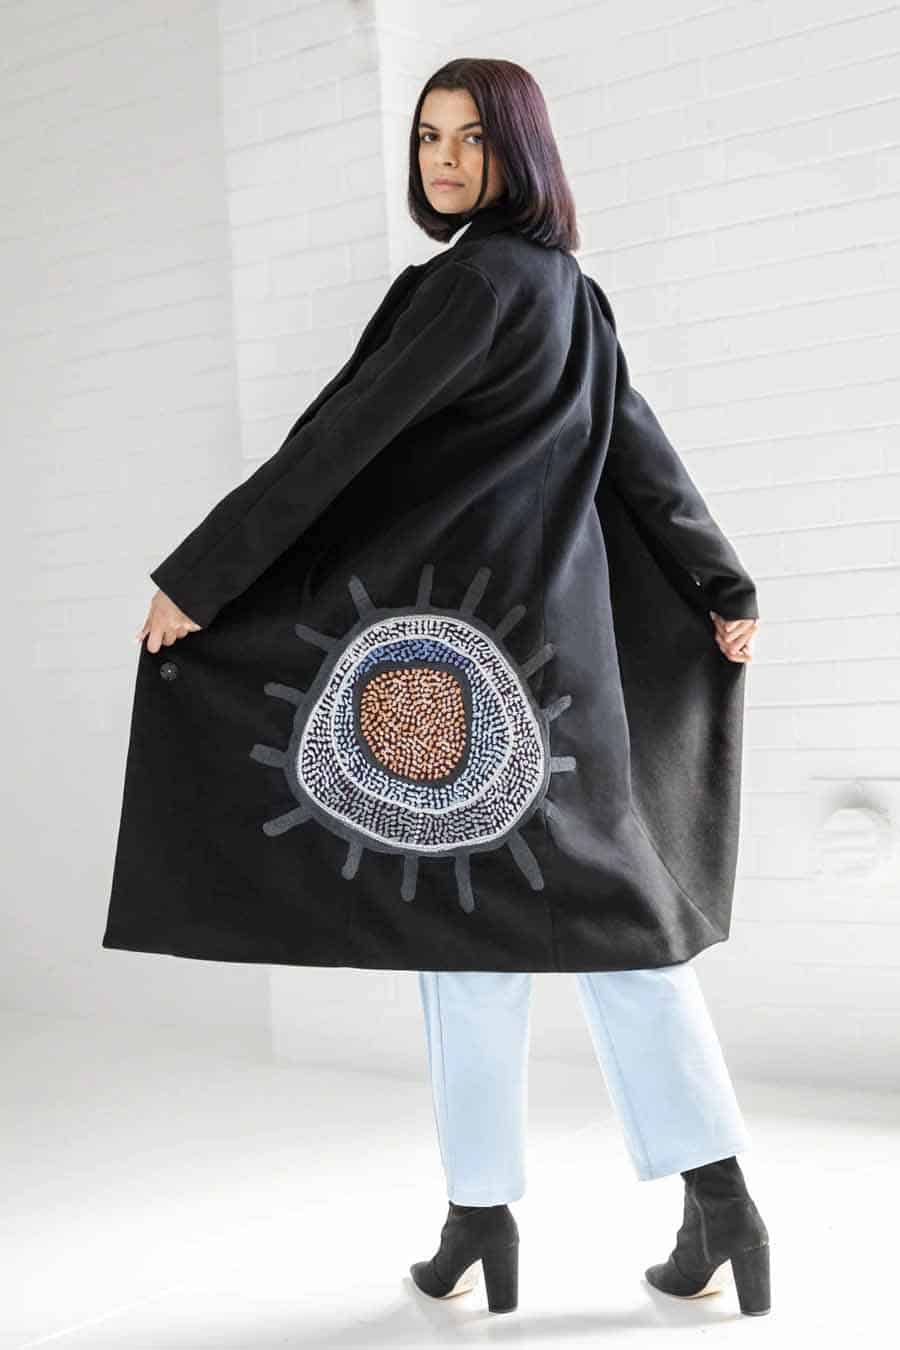 Unreal Fur lack vegan wool coat with embroided stitching on back